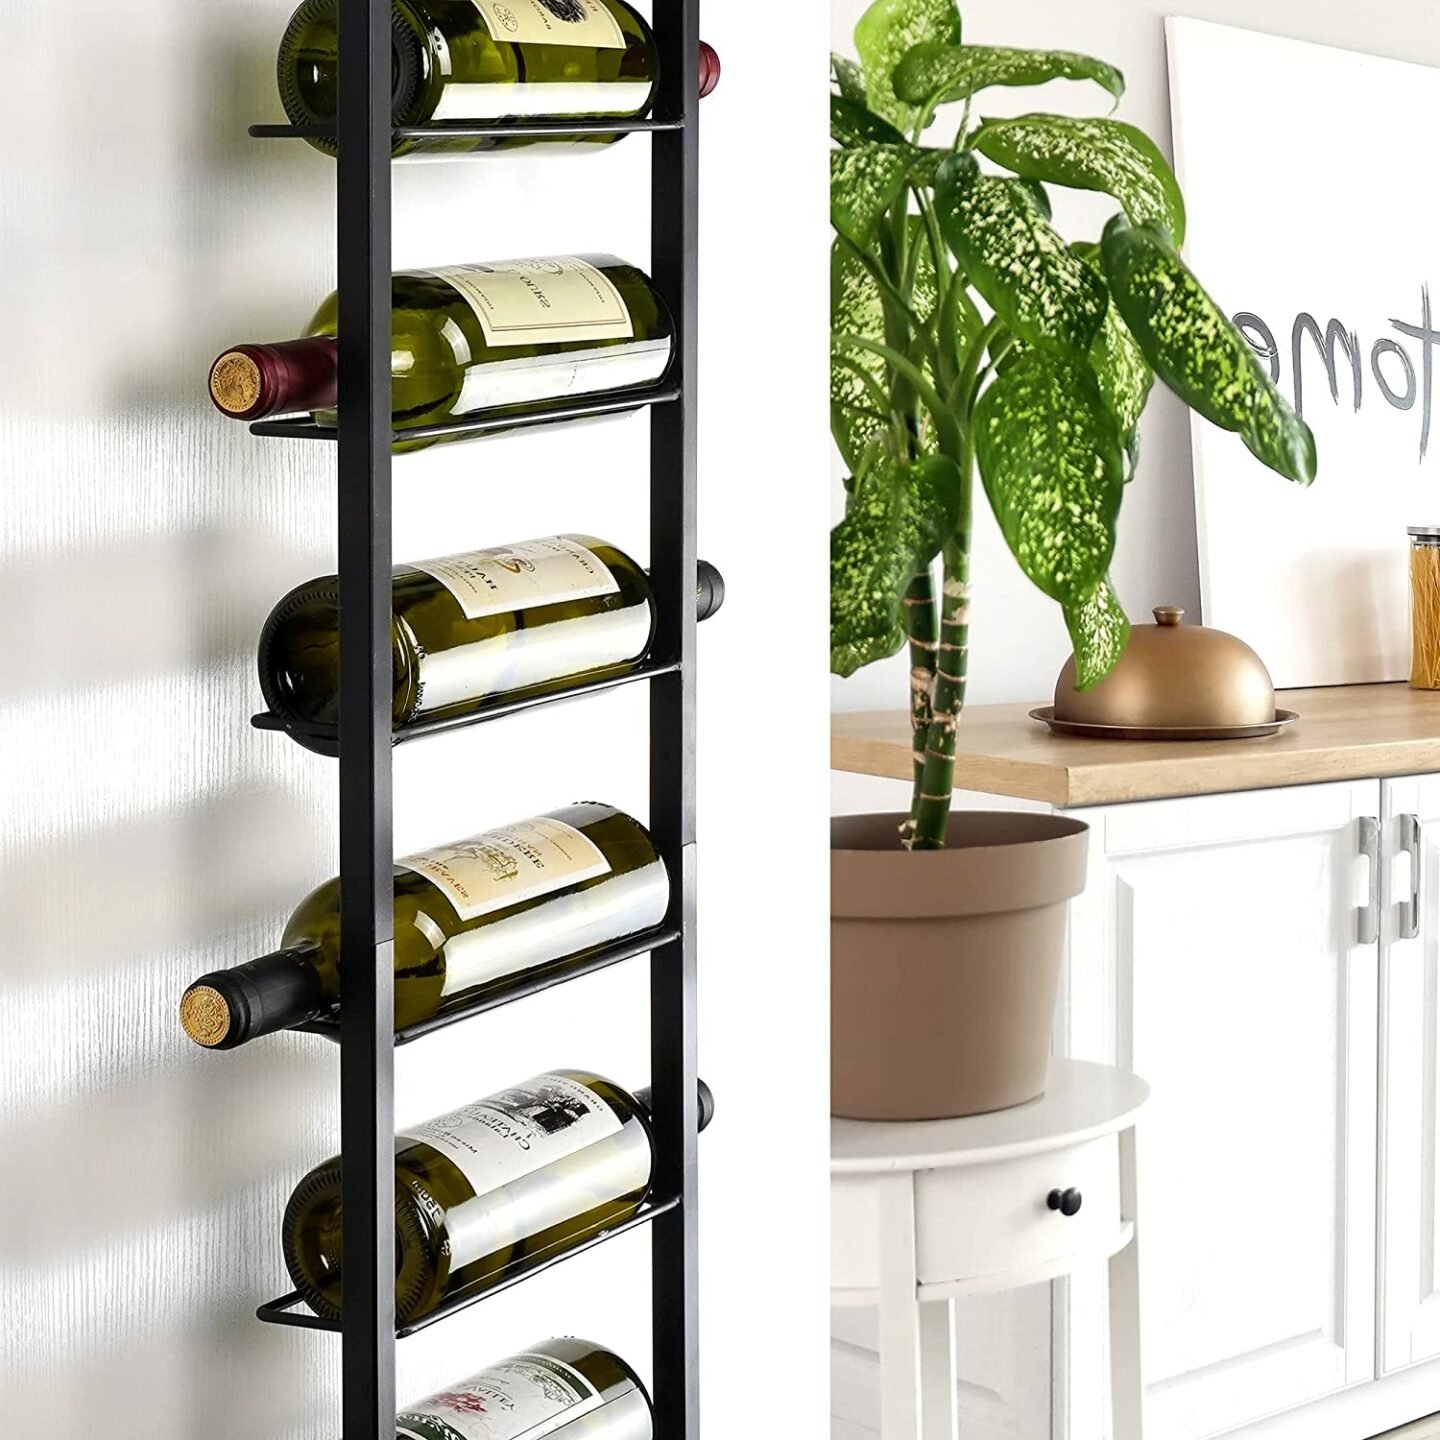 Black wrought iron wine rack hung on a white wall near cabinets